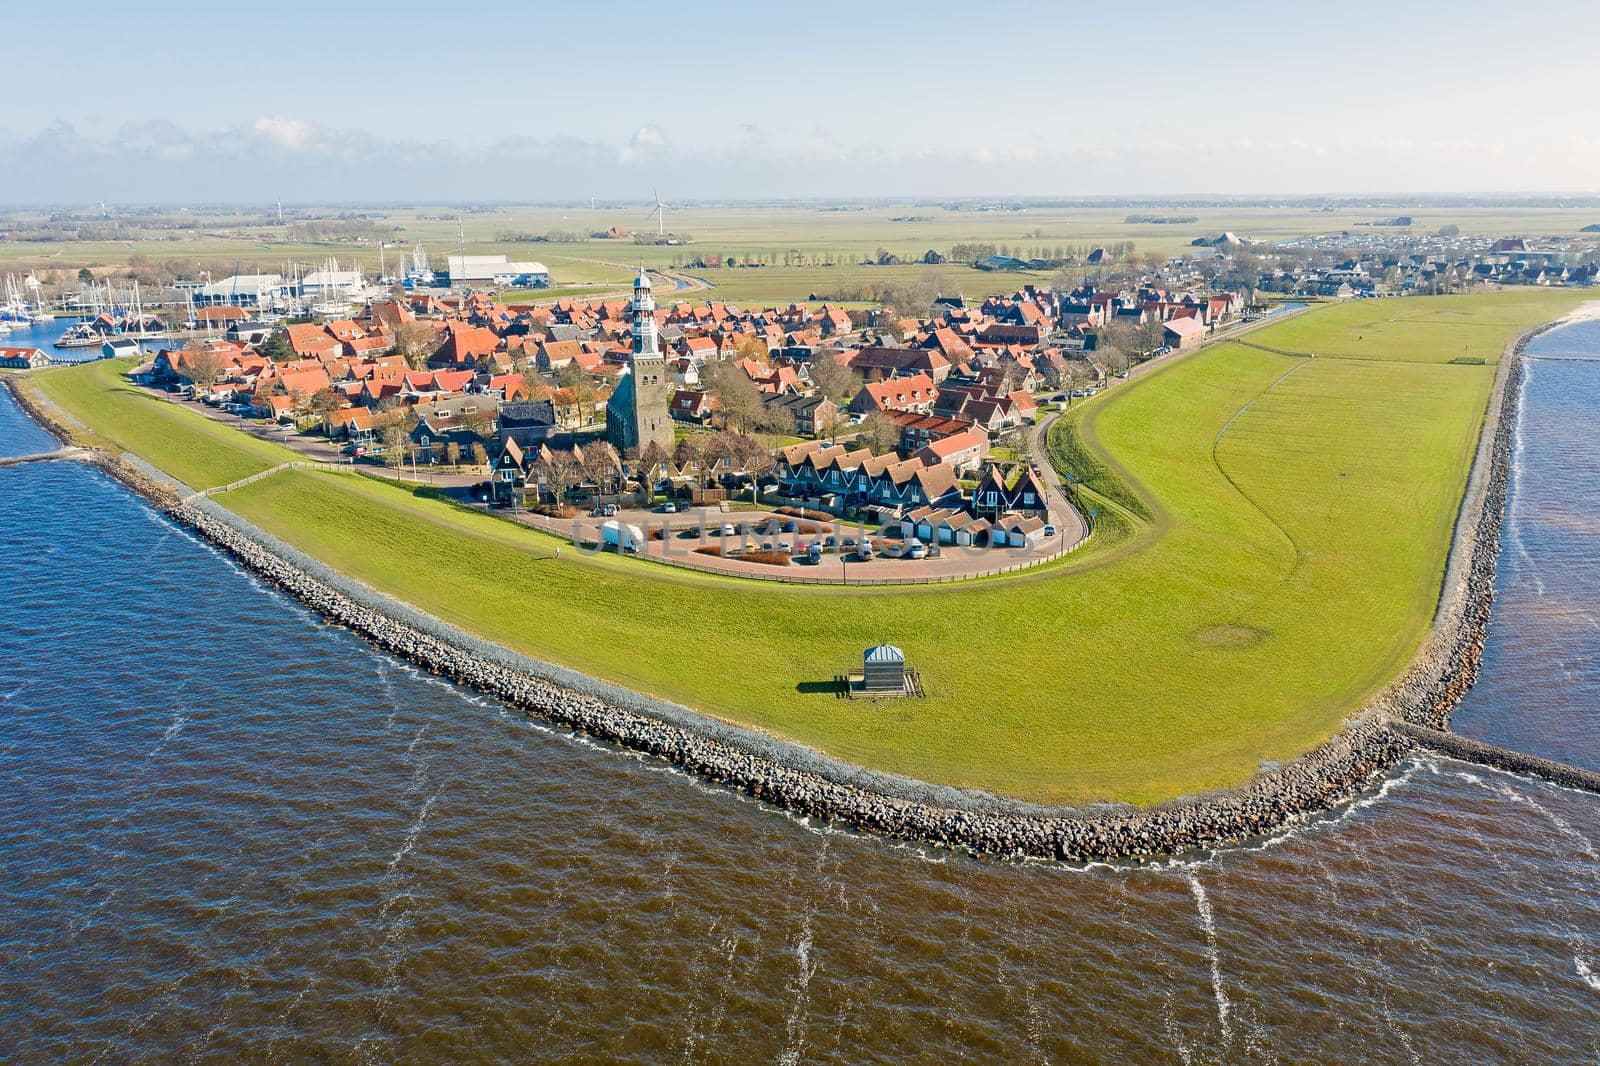 Aerial from the historical town Hindeloopen at the IJsselmeer in the Netherlands by devy